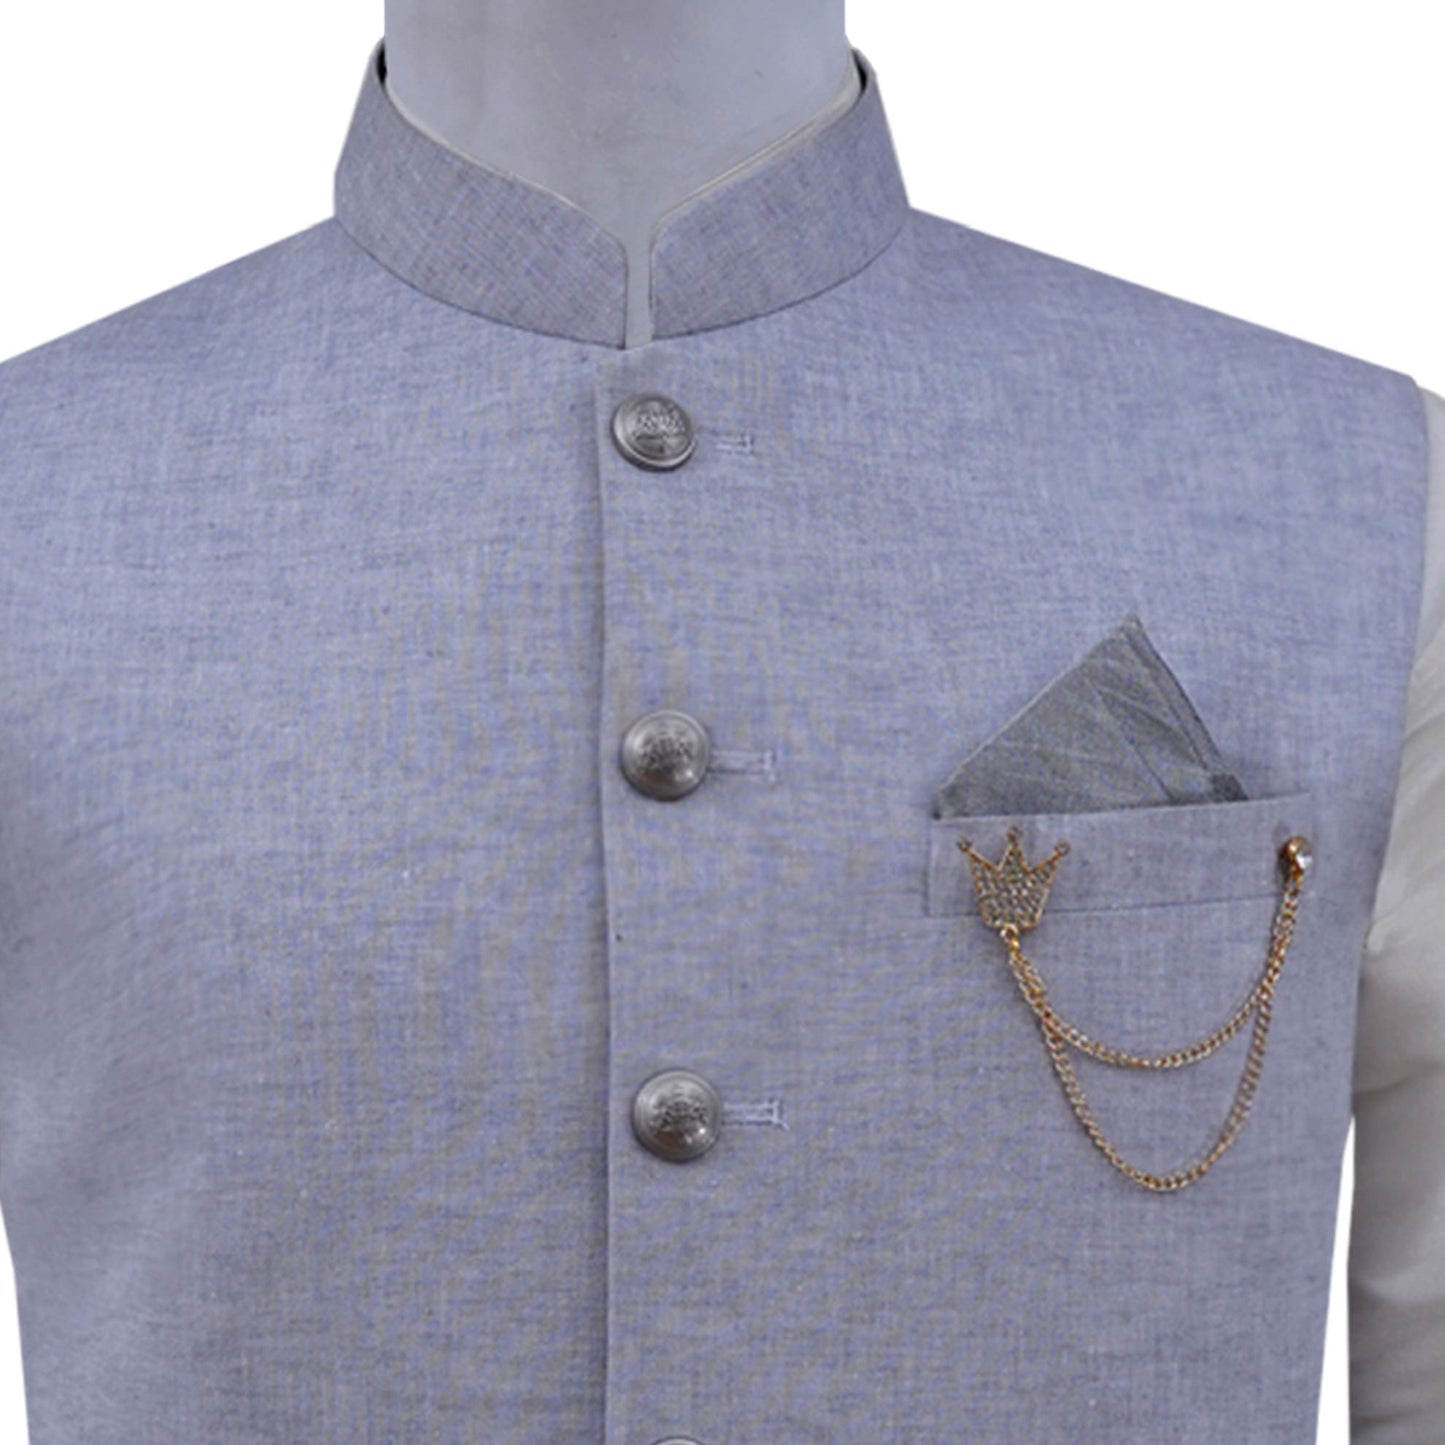 Summer wear imported linen fabric waistcoat with golden chain brooch